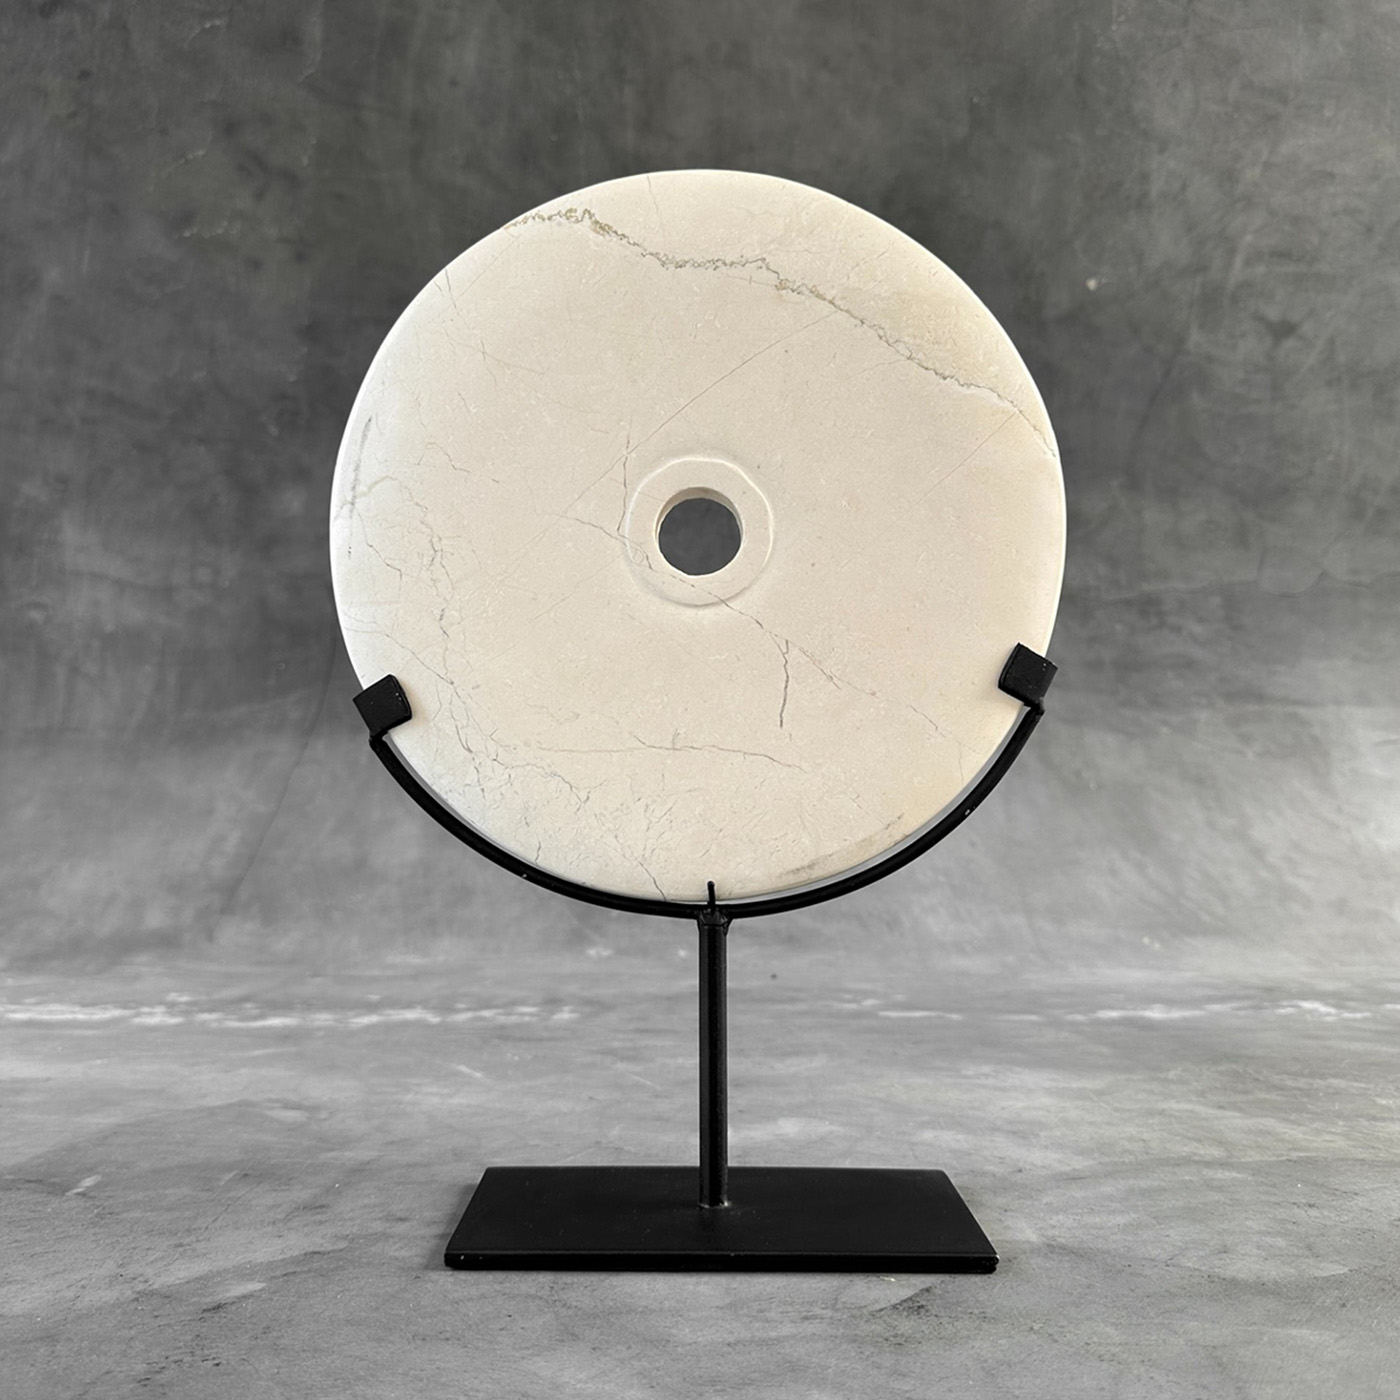 Decorative Marble Disc on Stand